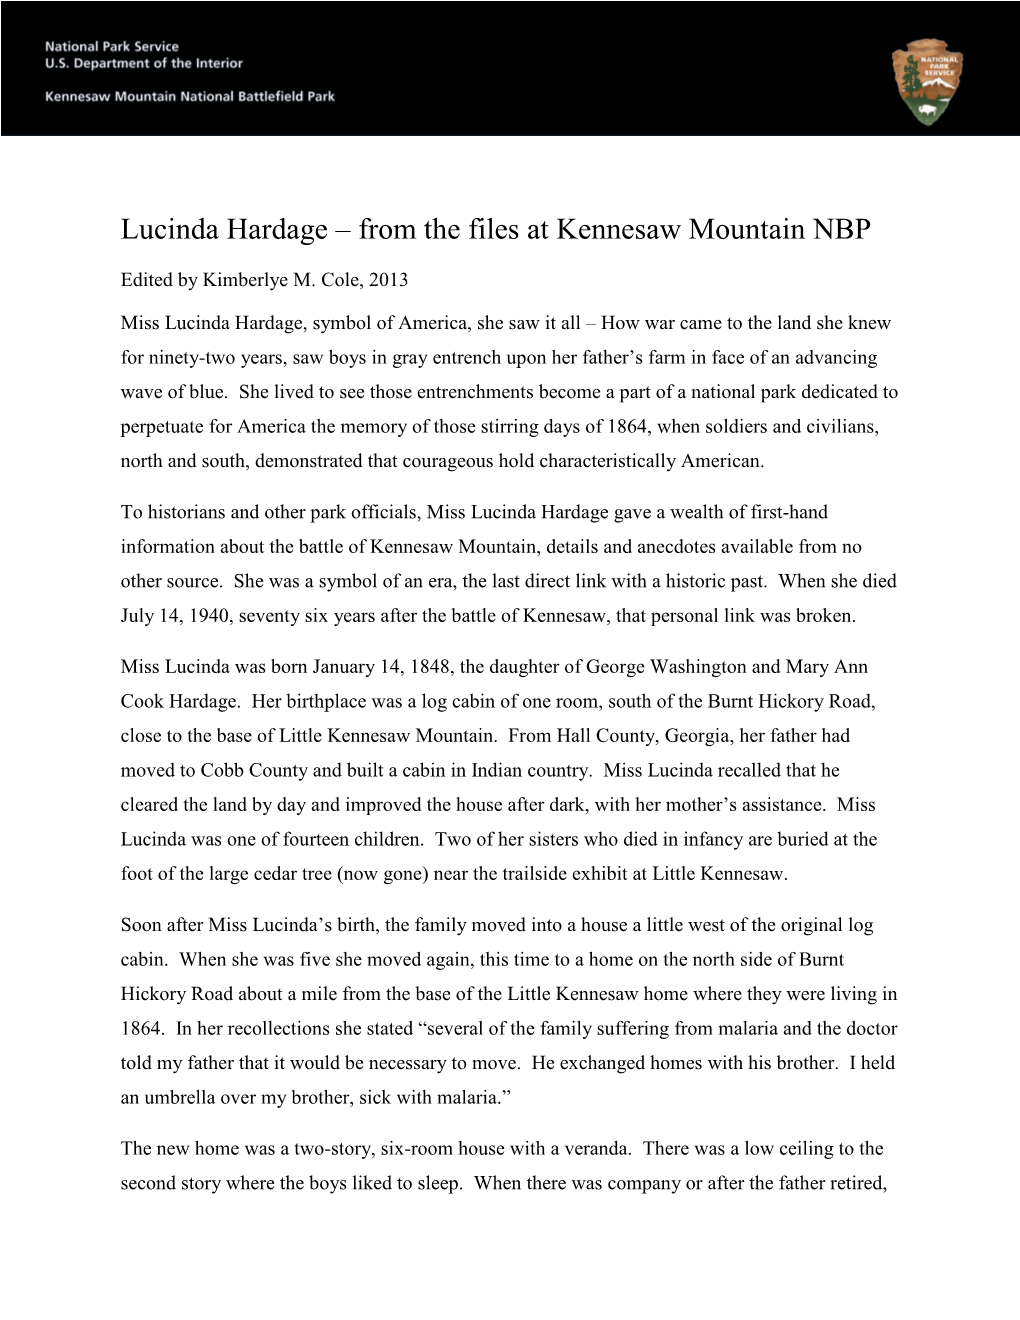 Lucinda Hardage – from the Files at Kennesaw Mountain NBP